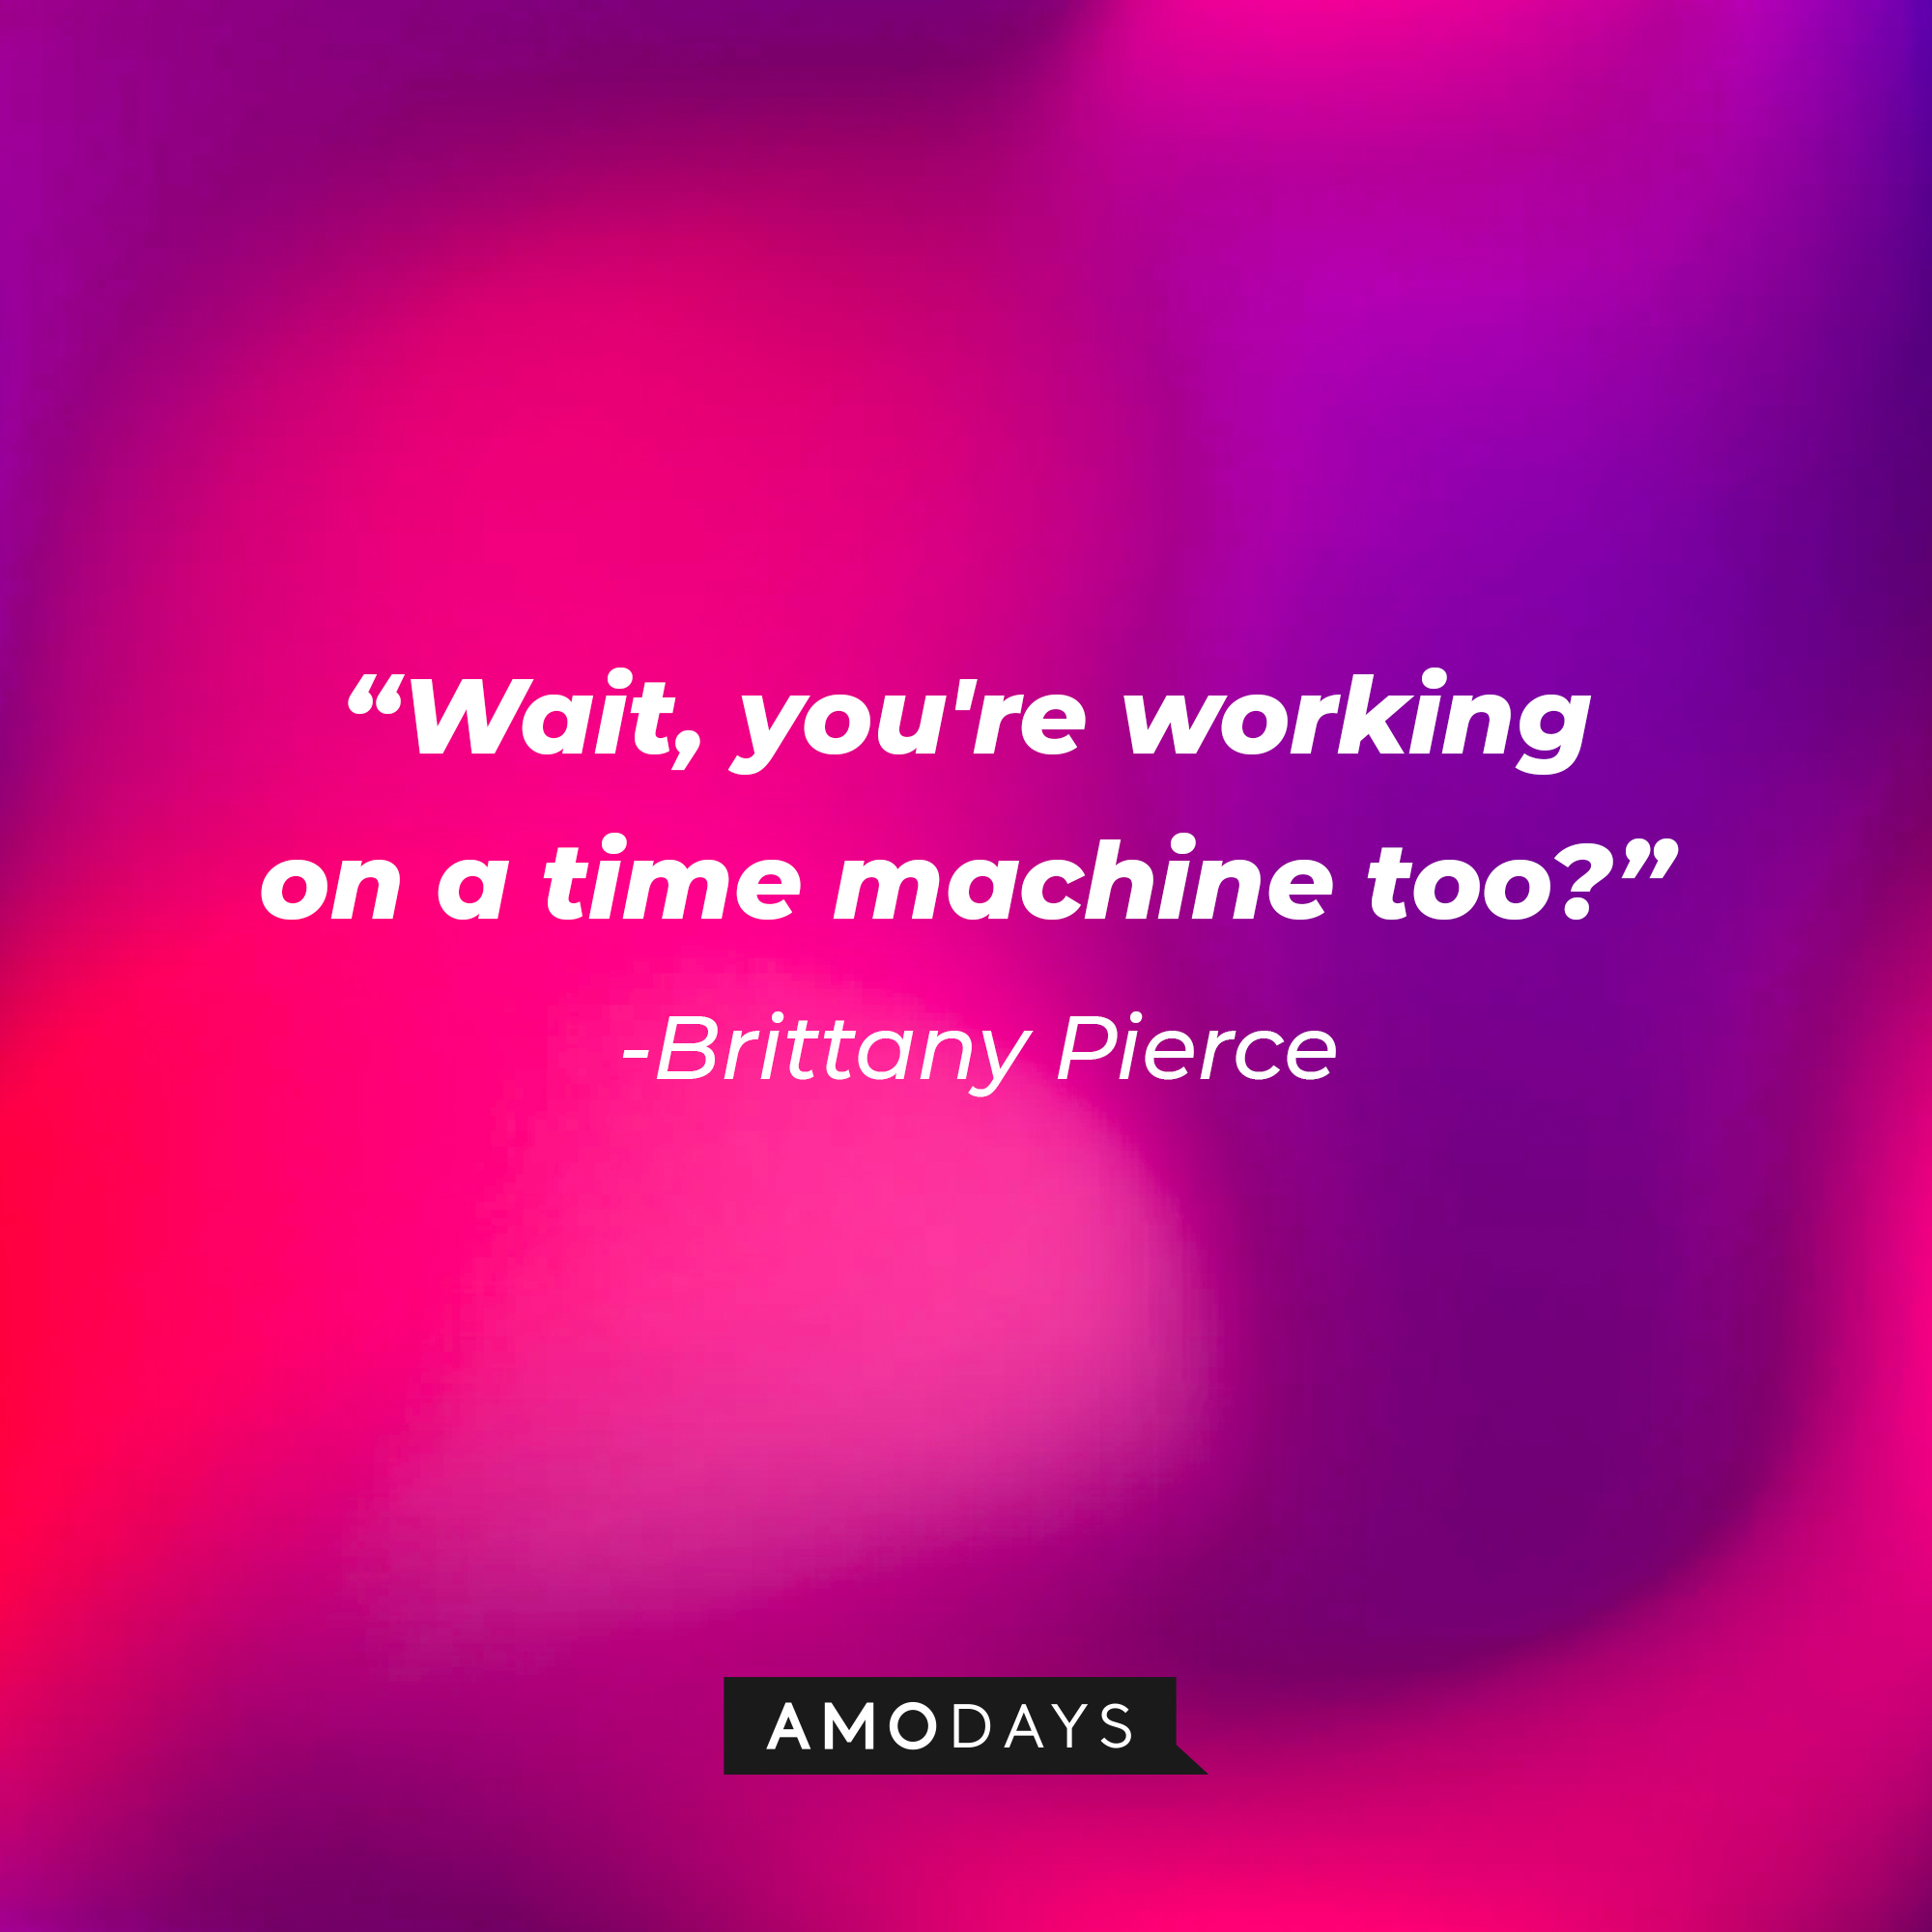 Brittany Pierce’s quote from “Glee”: “Wait, you're working on a time machine too?” | Image: AmoDays